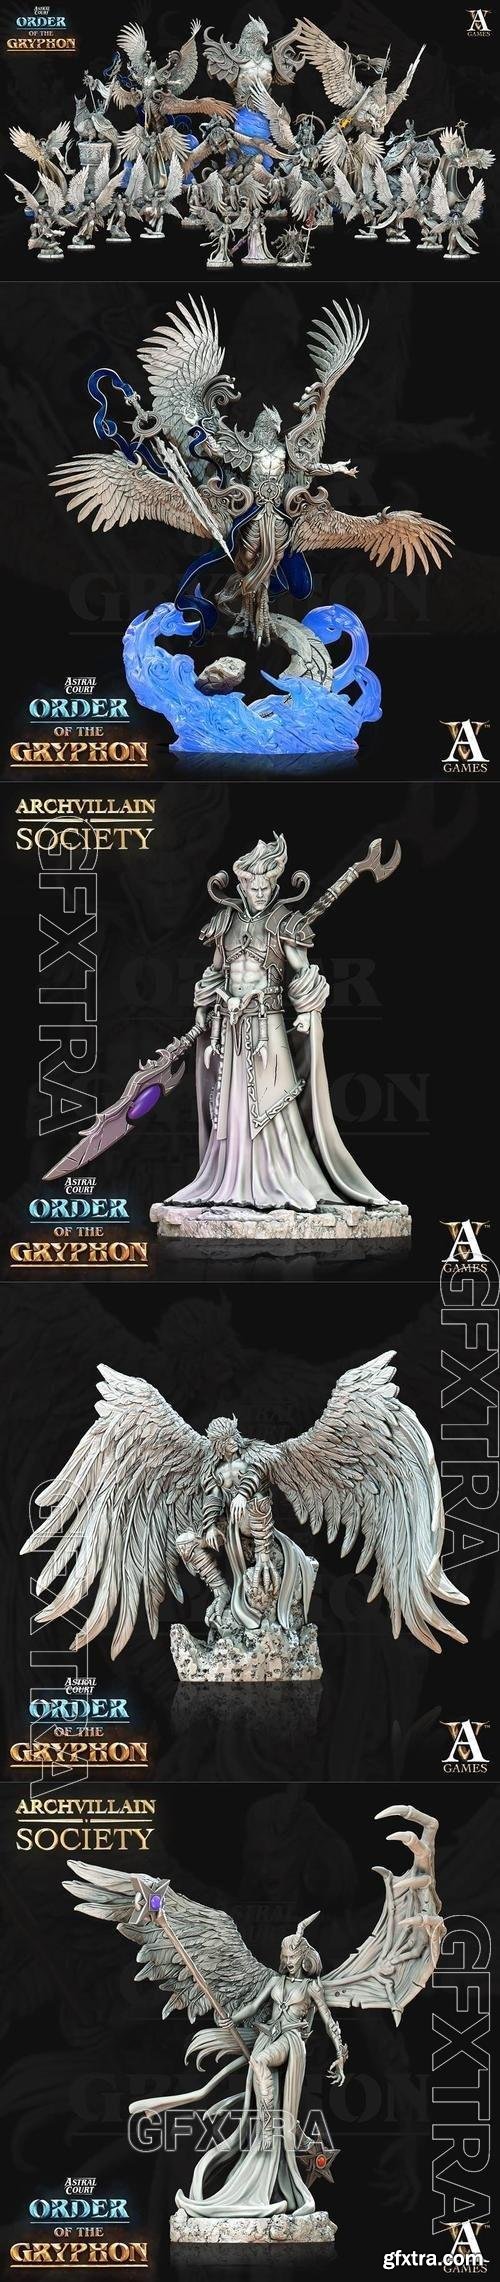 Archvillain Games - Astral Court - Order of the Gryphon 3D